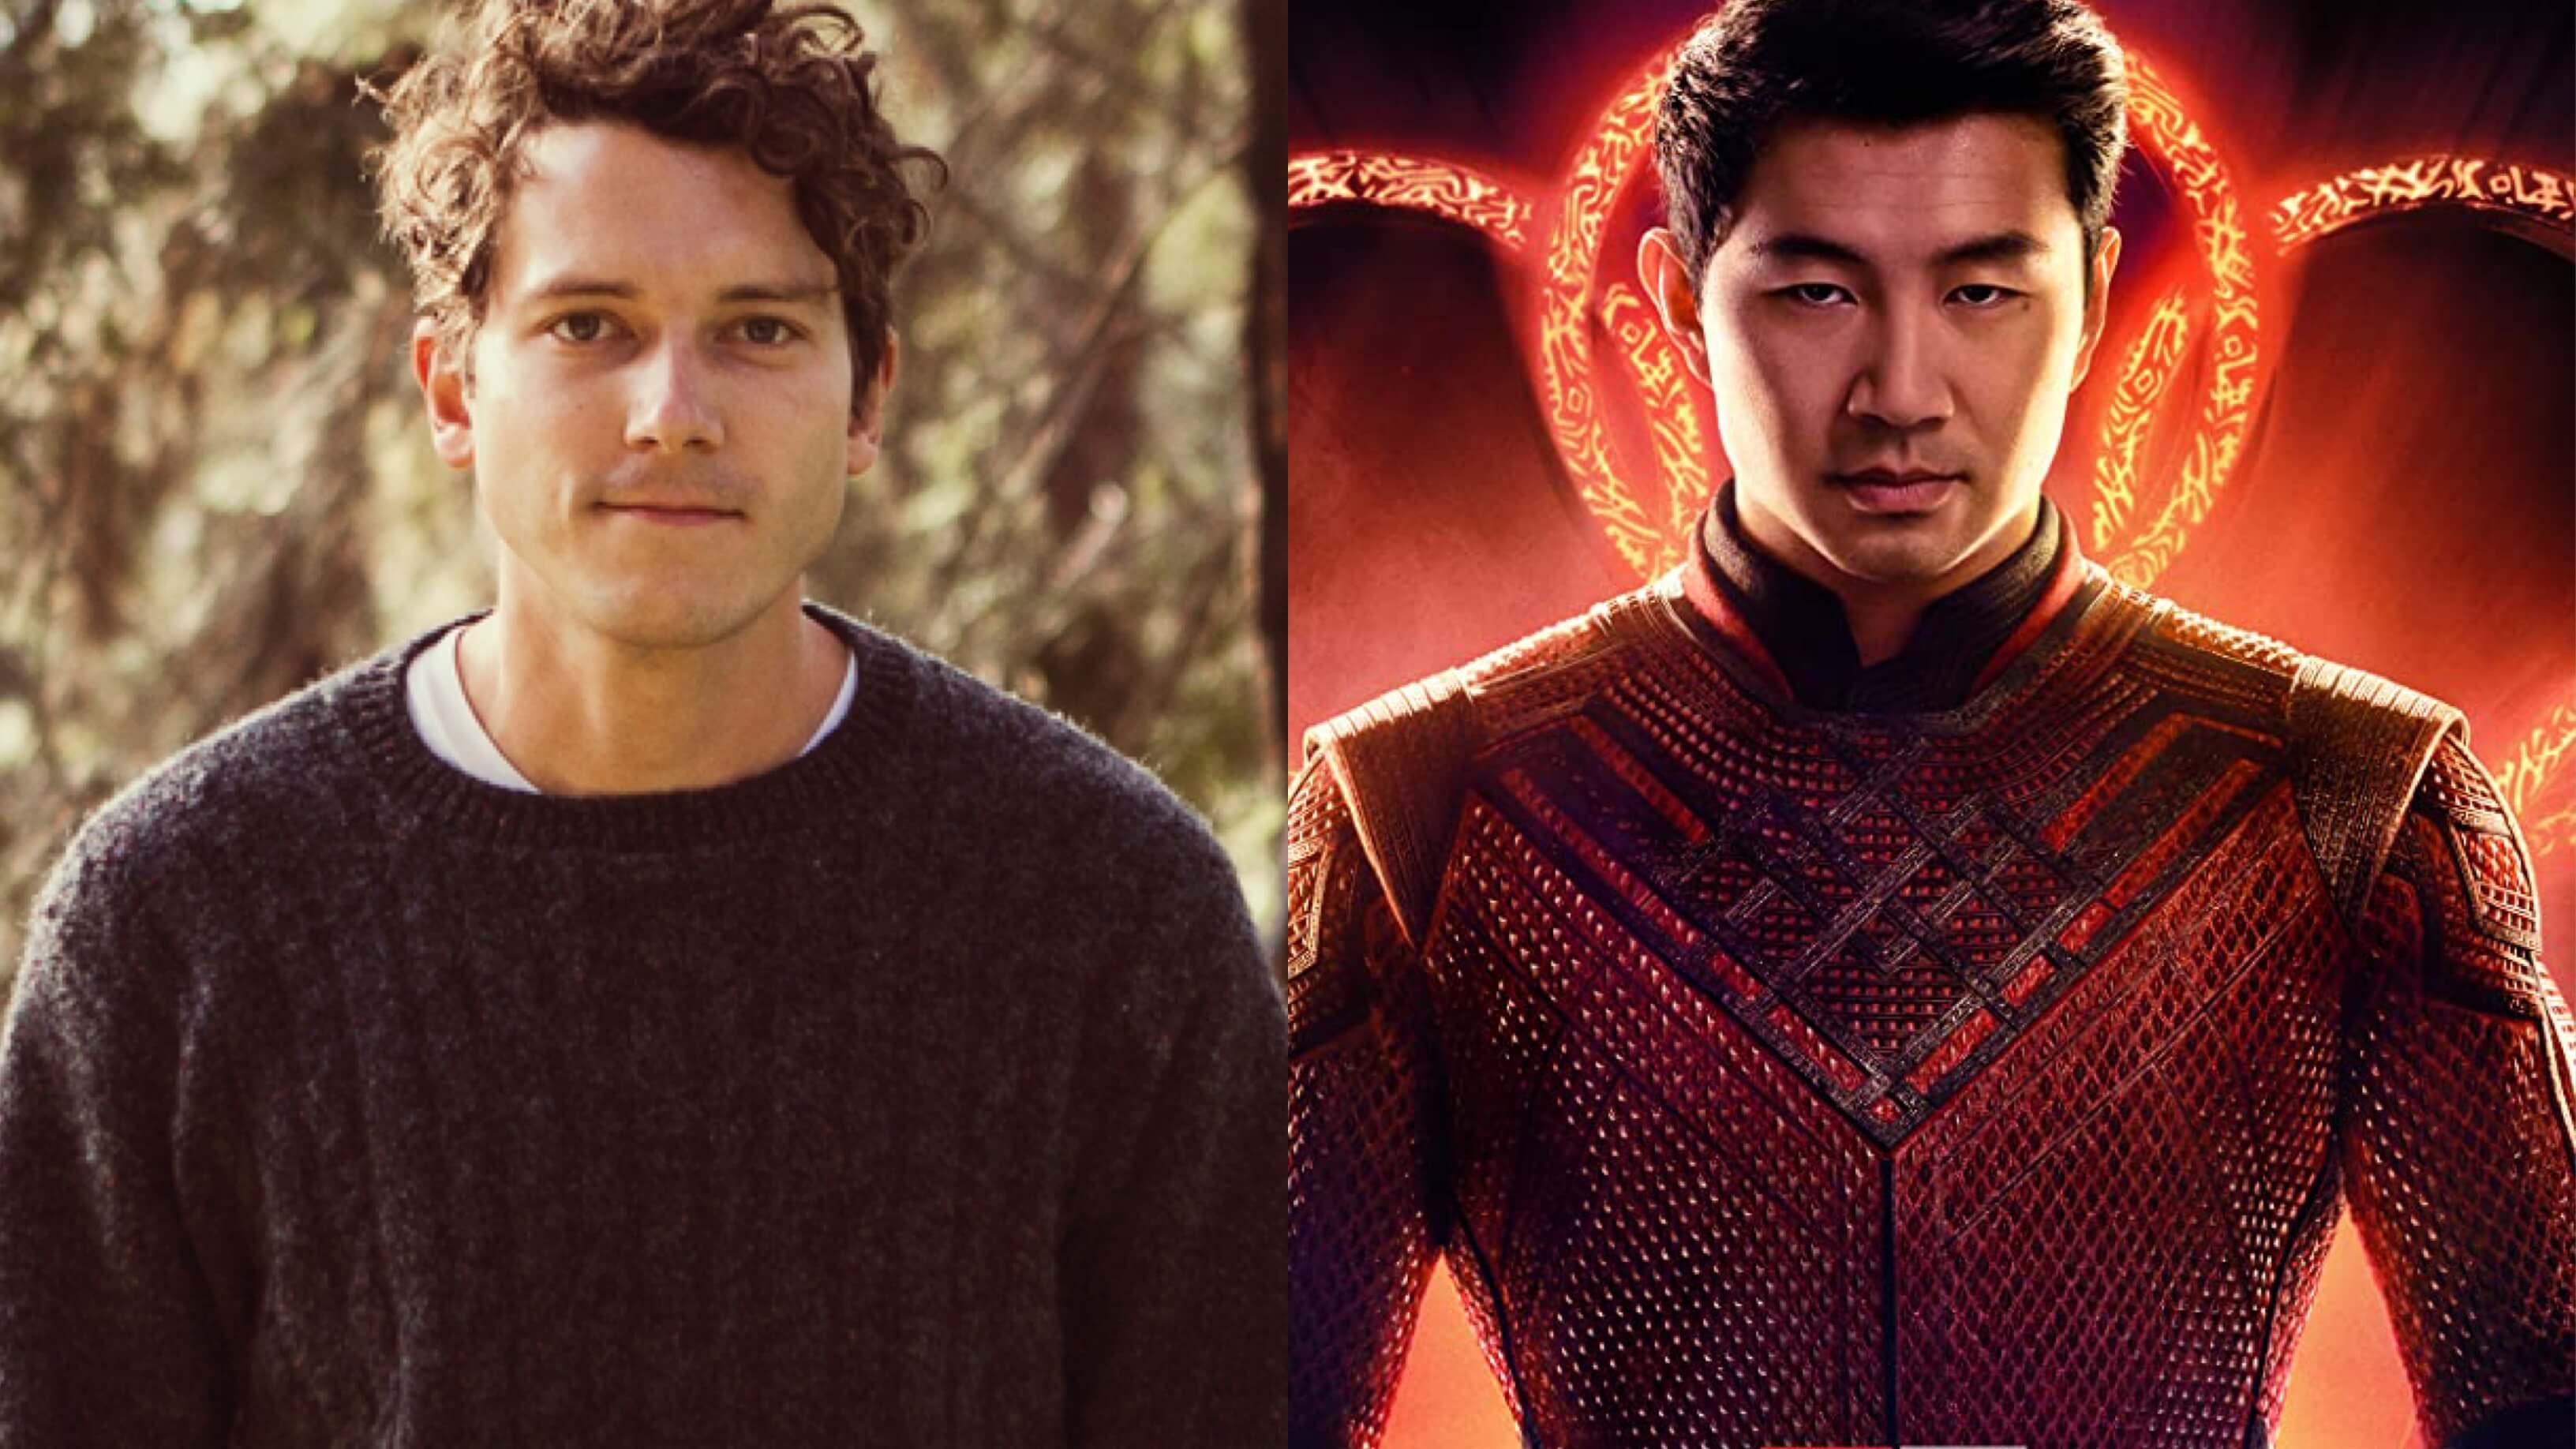 Joel P. West to Score Marvel’s ‘Shang-Chi and the Legend of the Ten Rings’